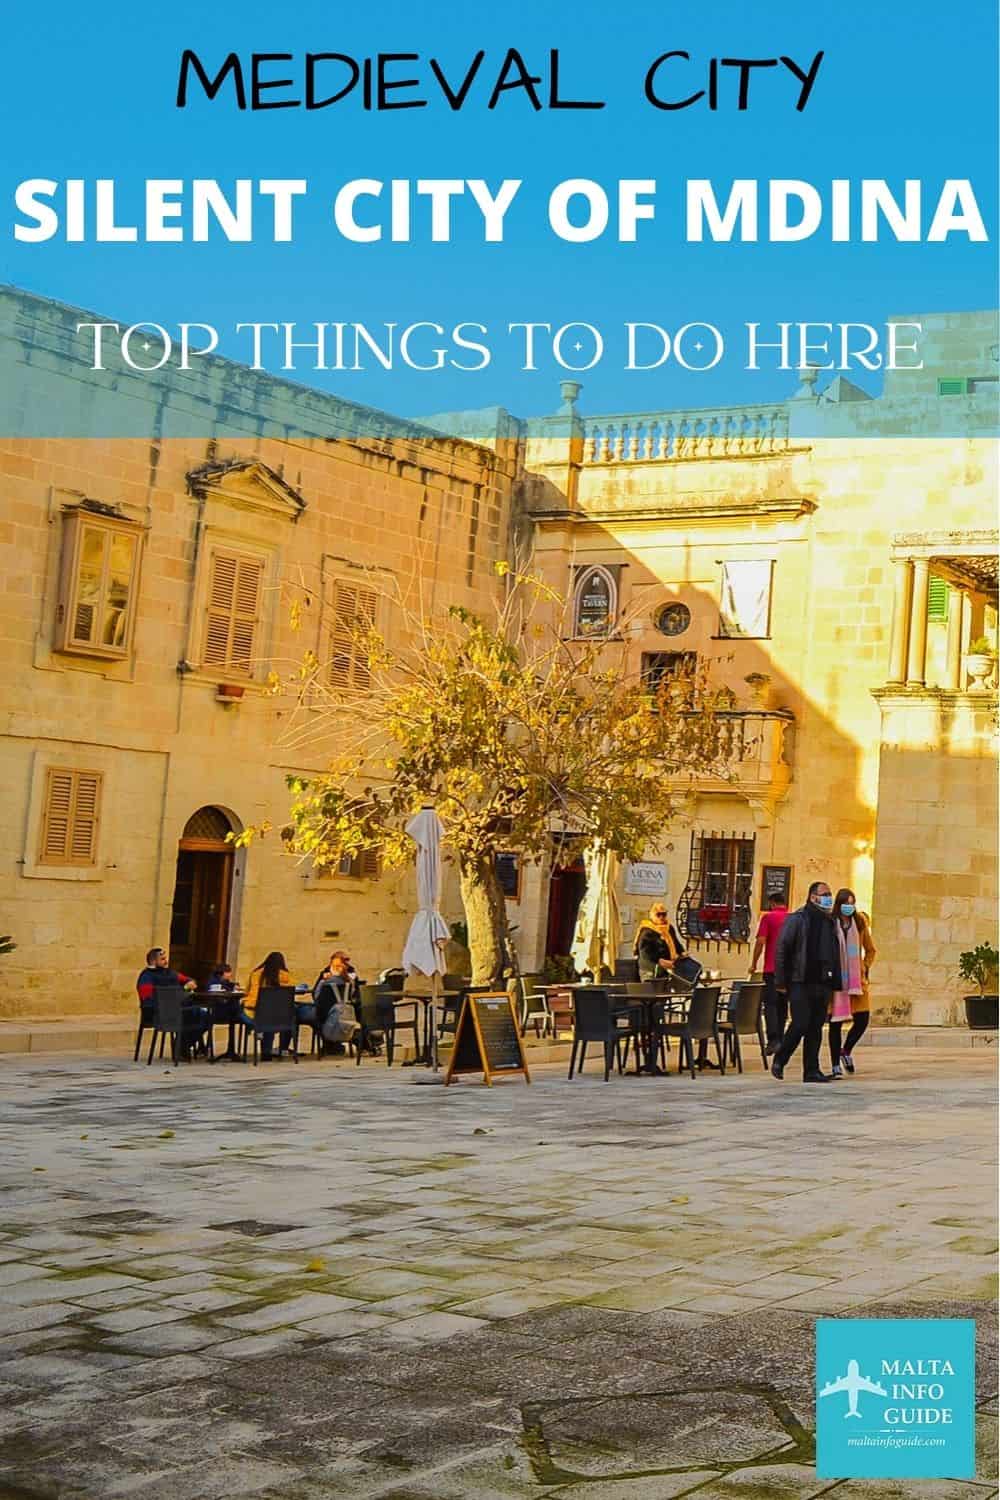 Here is the ultimate guide to the silent city of Mdina Malta. Use this guide to help visit most of the city.